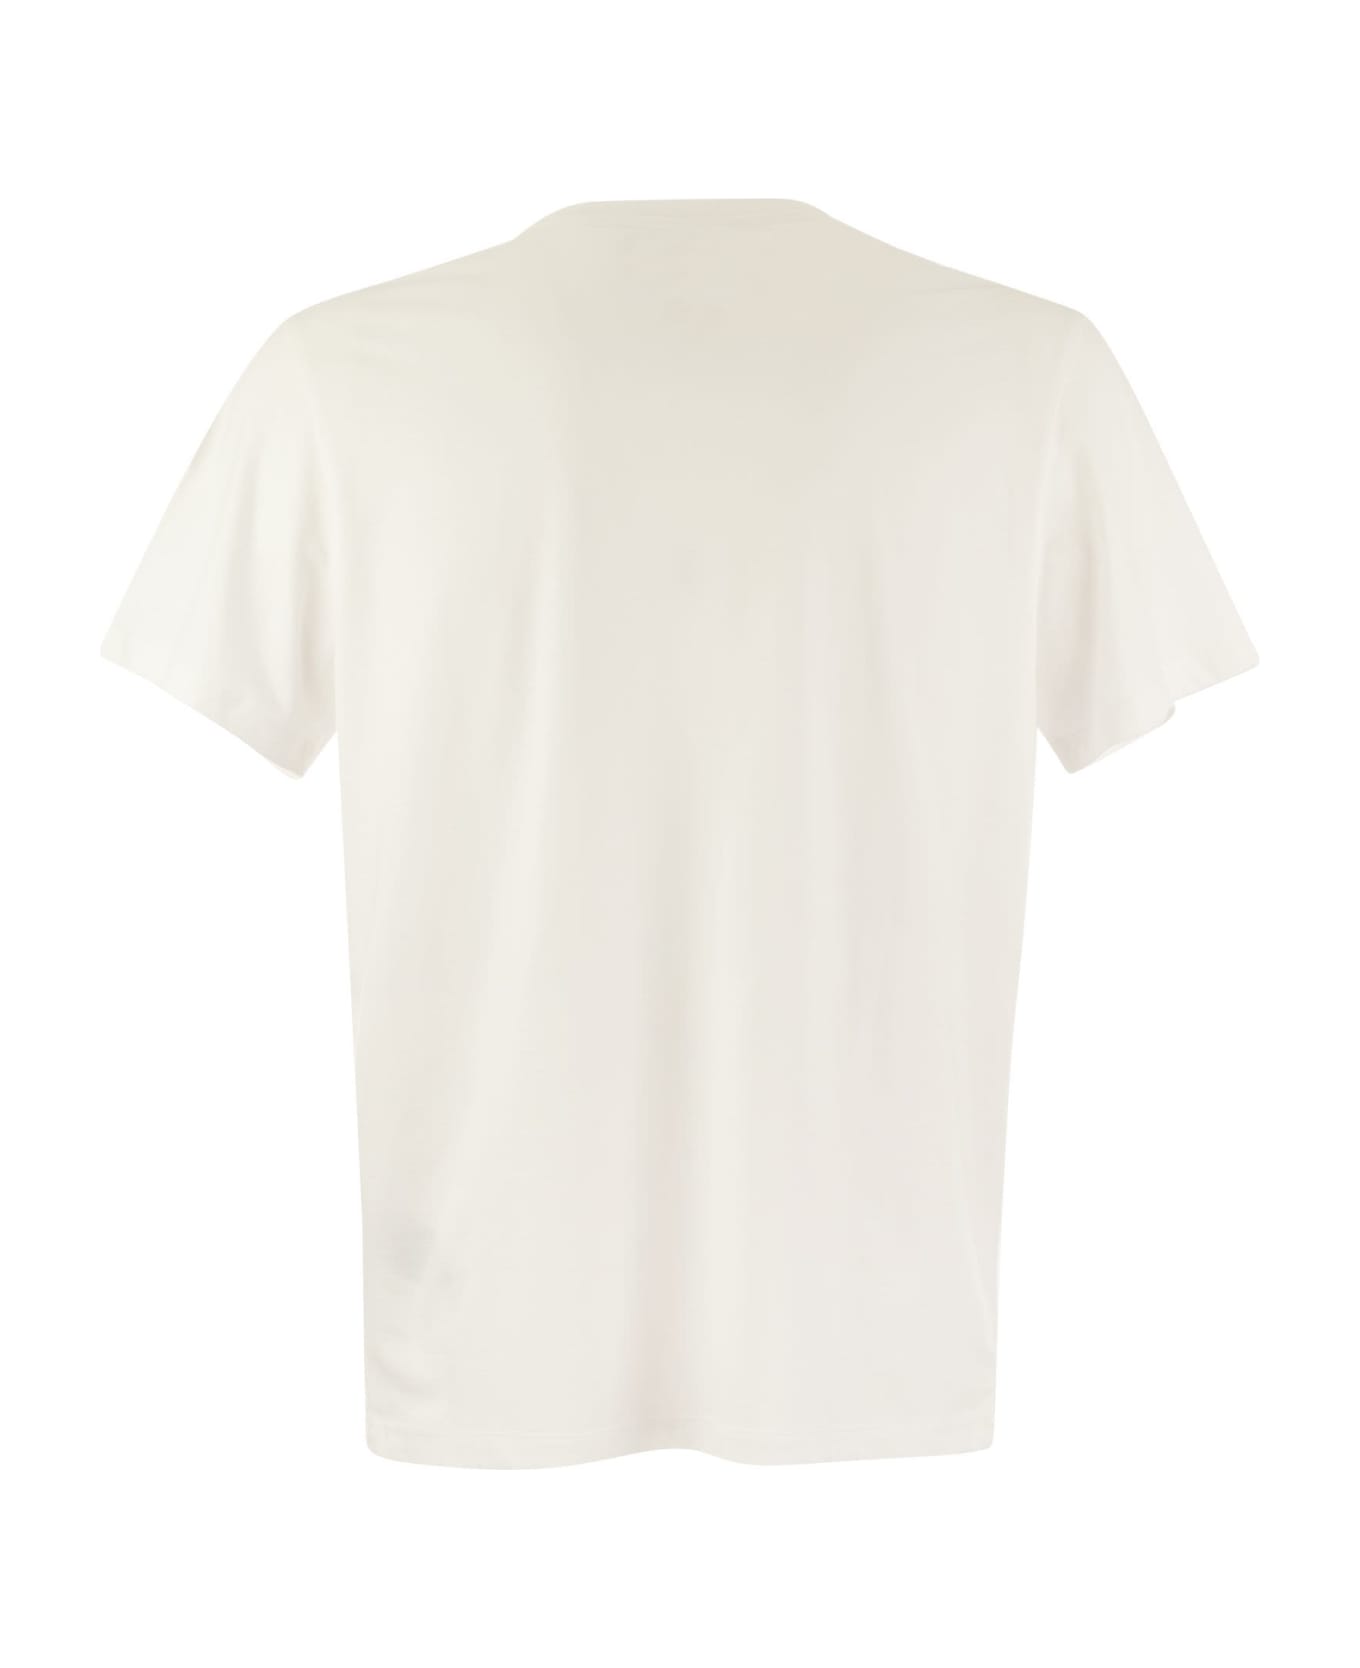 Parajumpers Shispare Tee - Cotton Jersey T-shirt - White シャツ